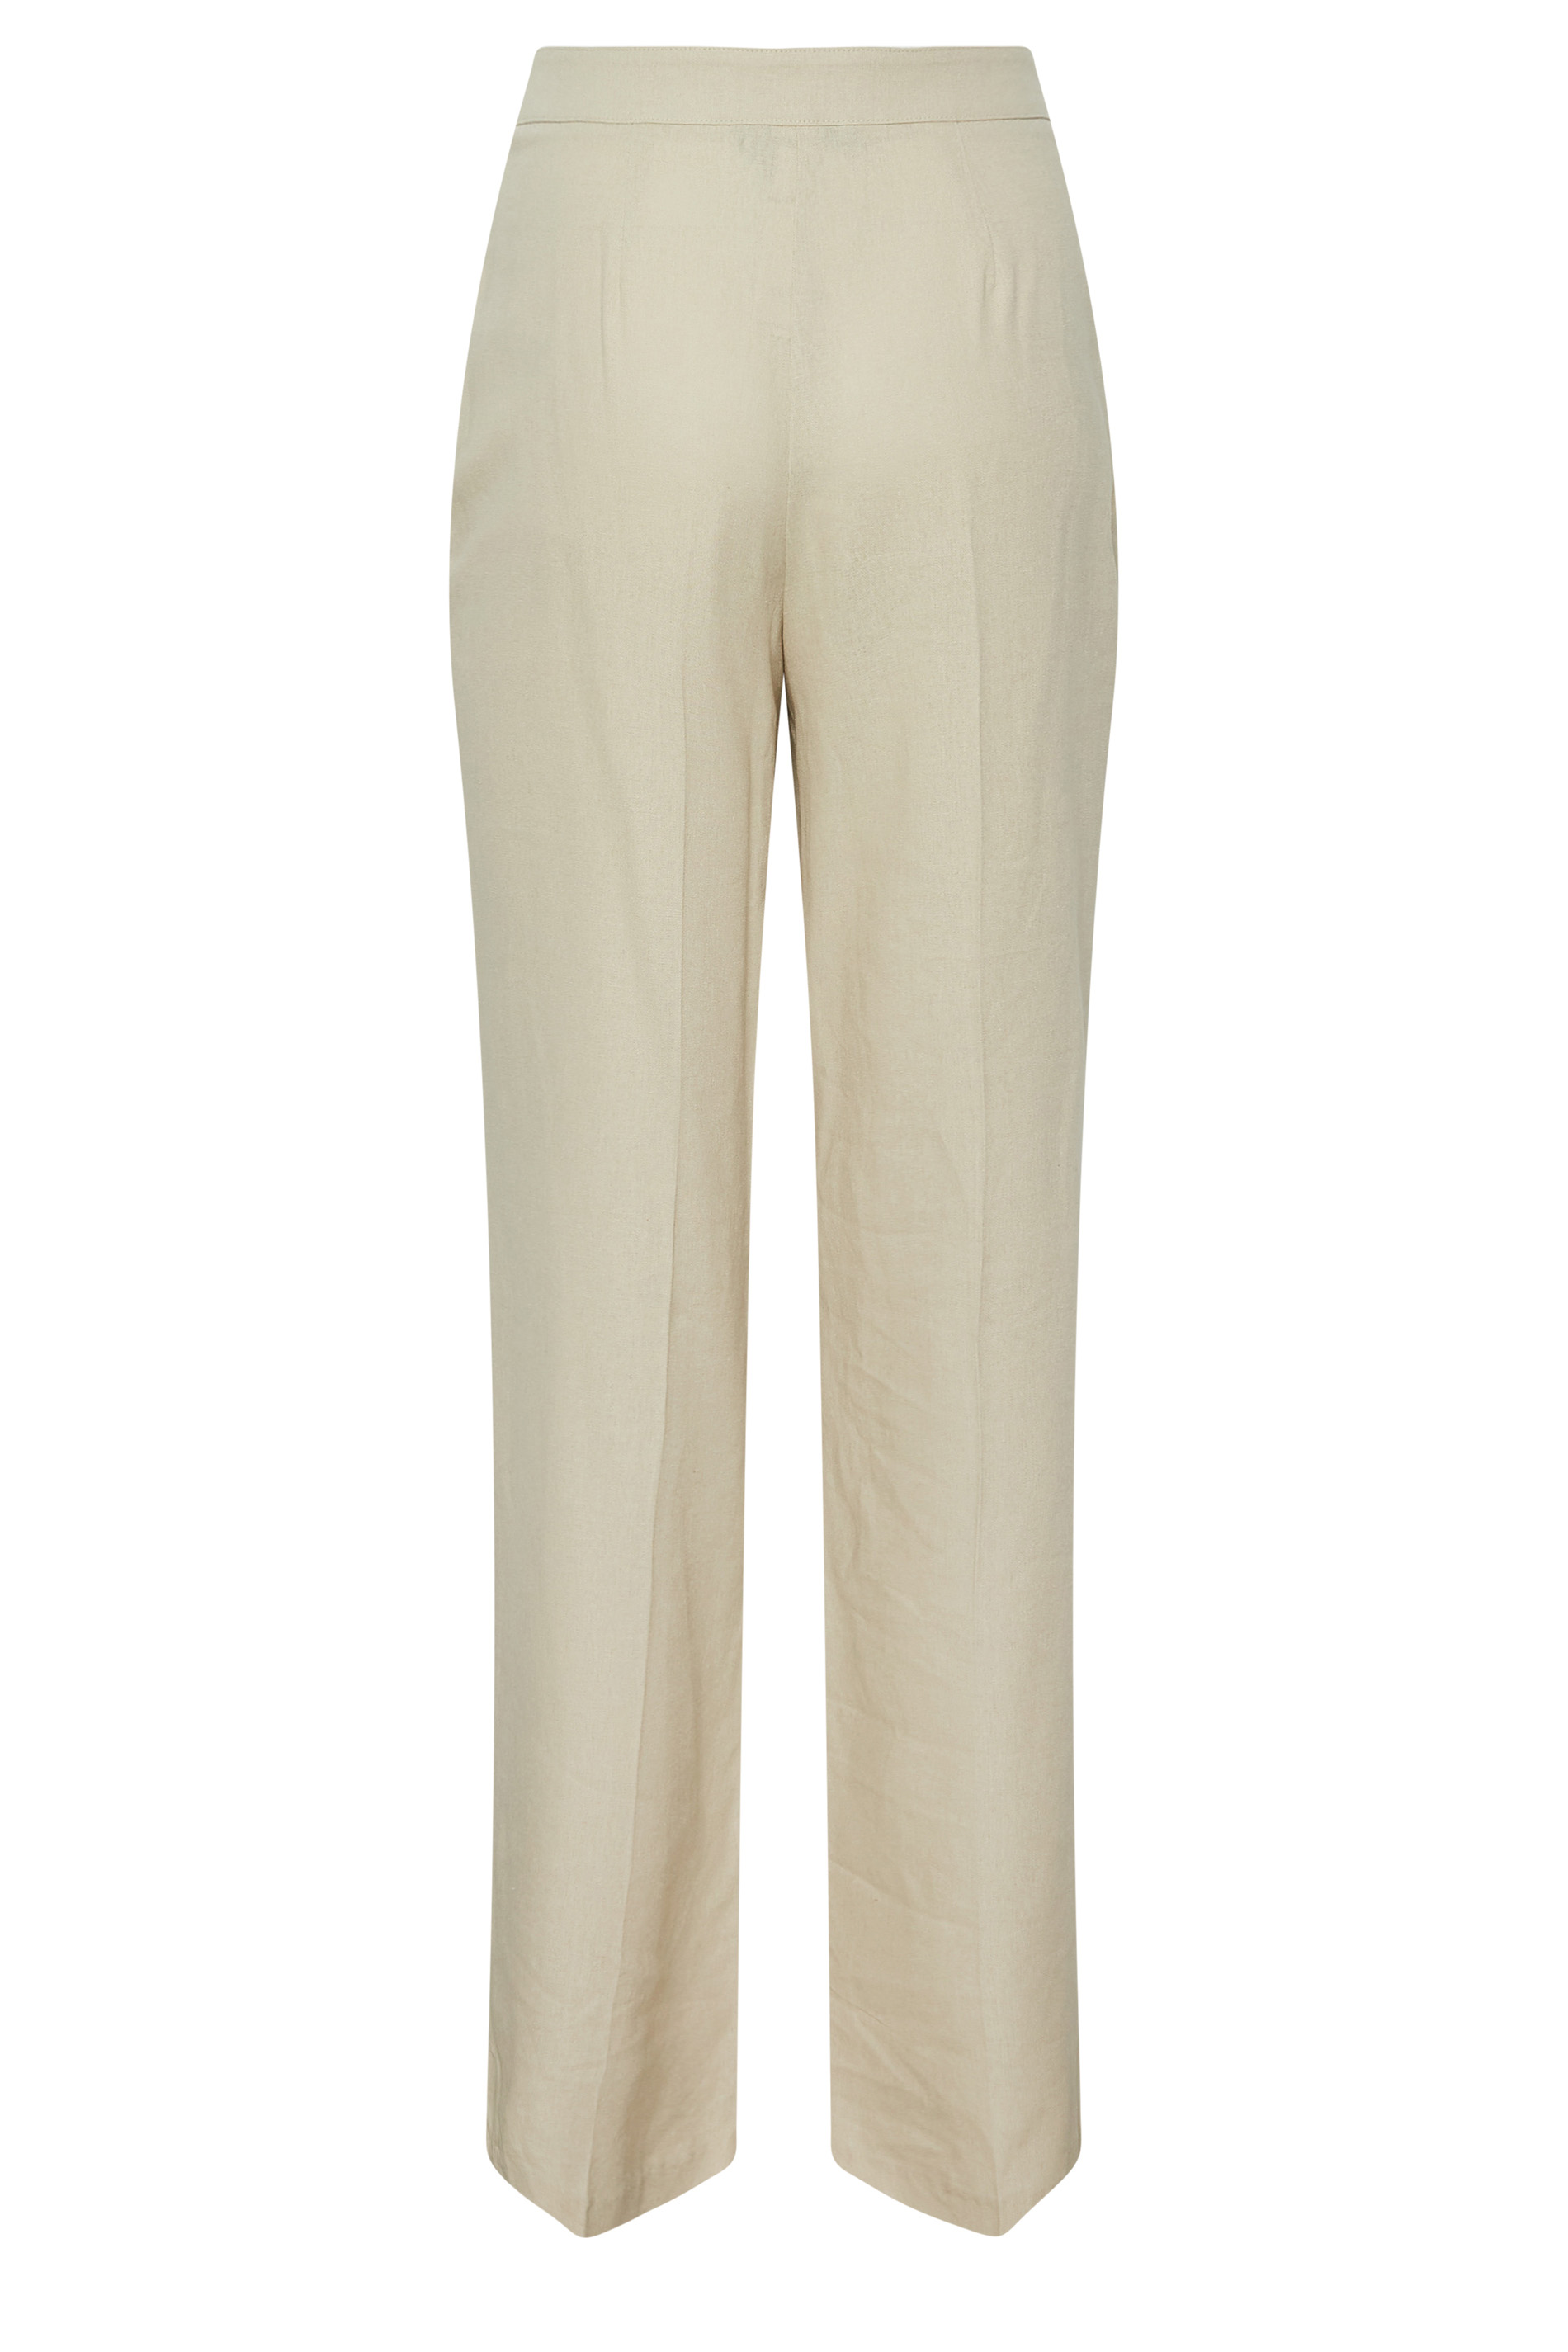 LTS Tall Stone Brown Linen Look Trousers | Long Tall Sally